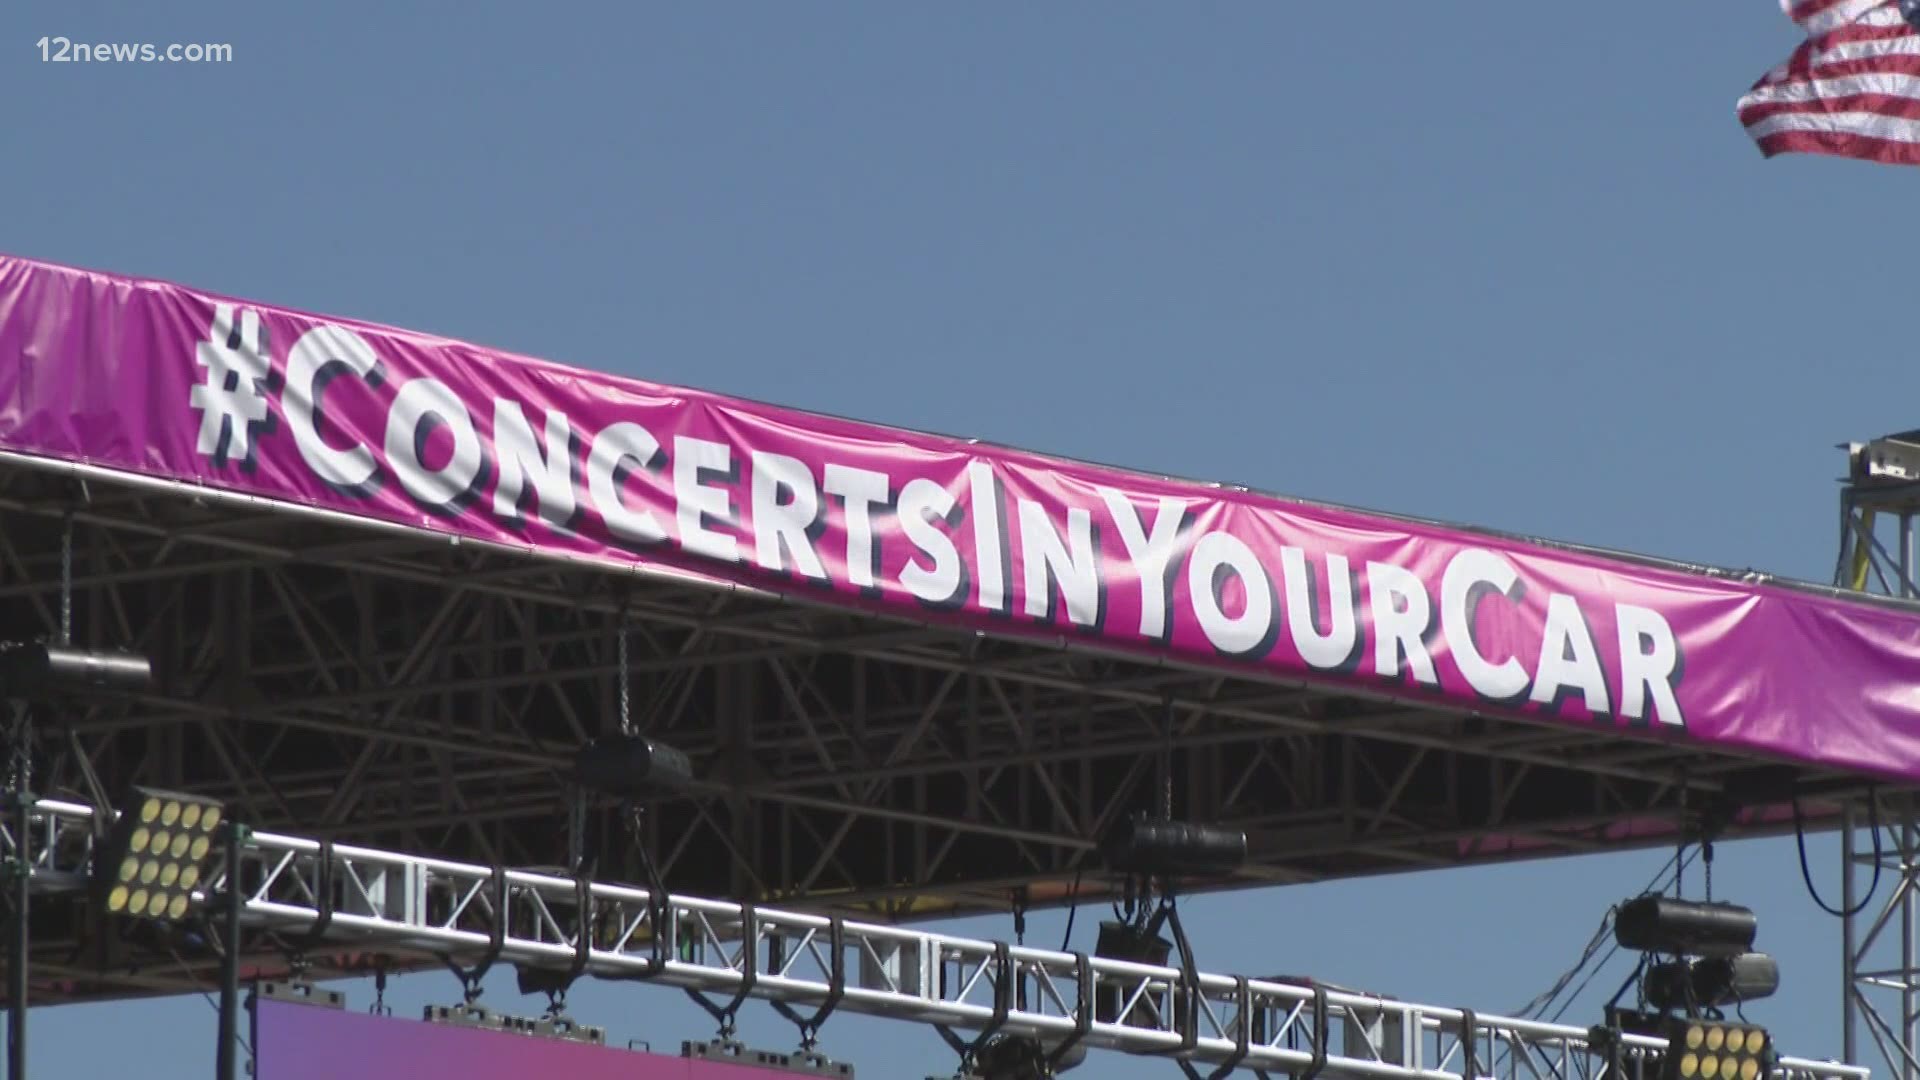 Concerts in Phoenix are rolling out in a new way as the coronavirus pandemic continues to plague the entertainment industry. Team 12's Jen Wahl has the latest.